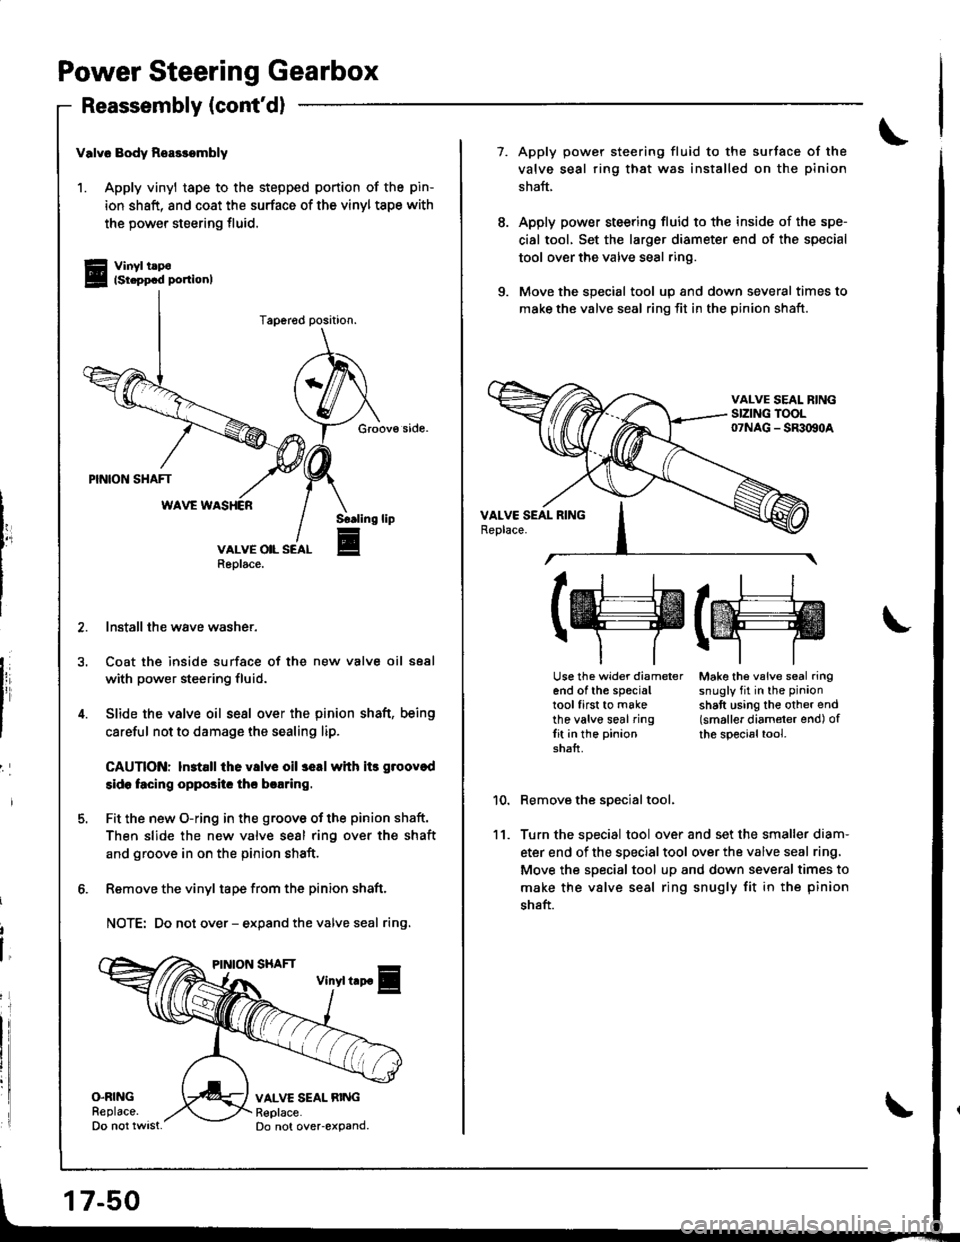 HONDA INTEGRA 1998 4.G Workshop Manual Power Steering Gearbox
Reassembly (contdl
i
valv6 Body Reasrombly
1. Apply vinyl tape to the stepped portion of the pin-
ion shaft, and coat the surface of the vinyl tspe with
the power steering flui